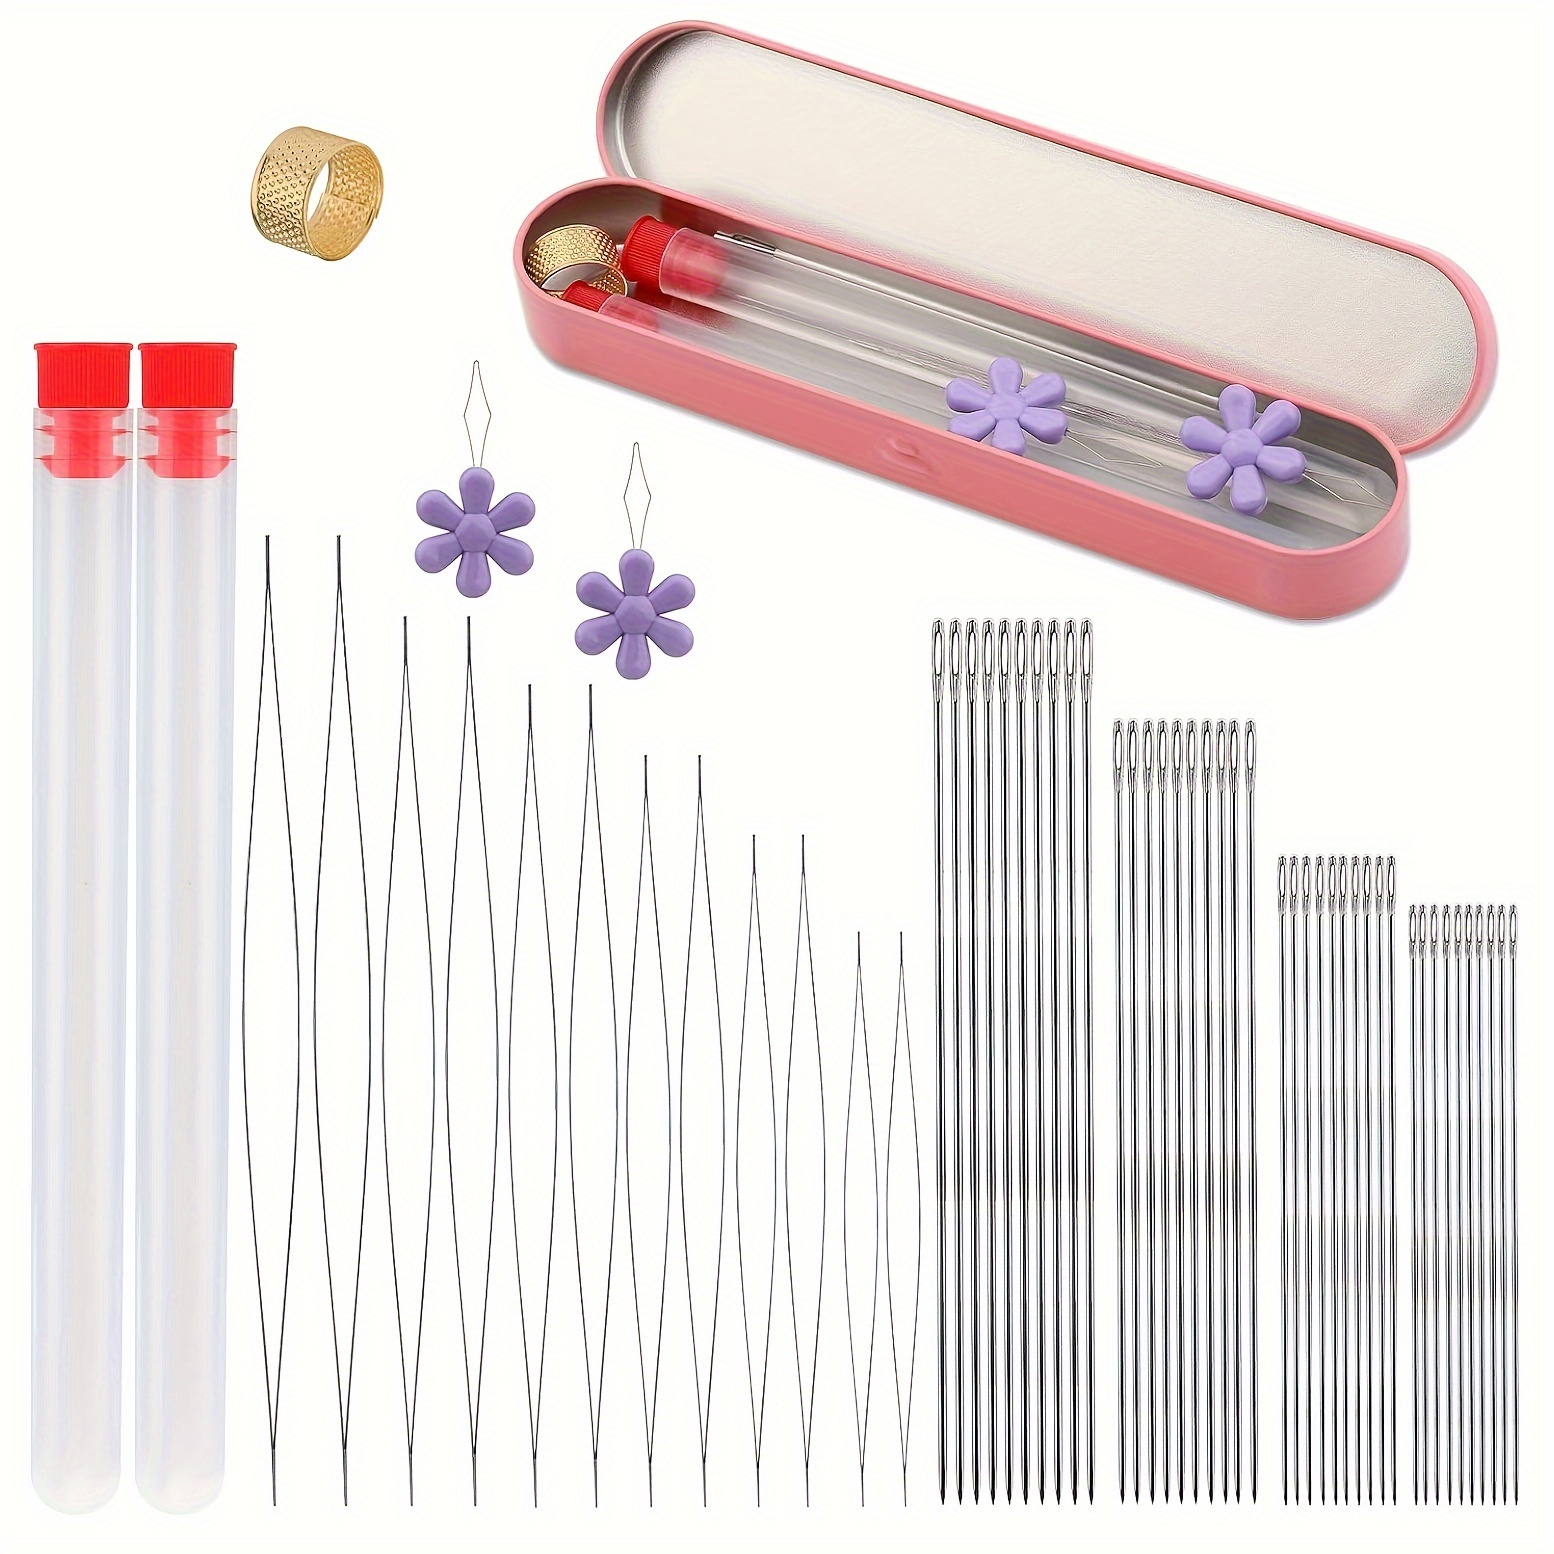 

58-piece Beading Needle Kit With 6 Sizes Of Large Eye & 4 Sizes Of Long Straight Pins, Seed Bead Needles, Threader, And Storage Tube - Ideal For Diy Bracelets And Jewelry Crafting